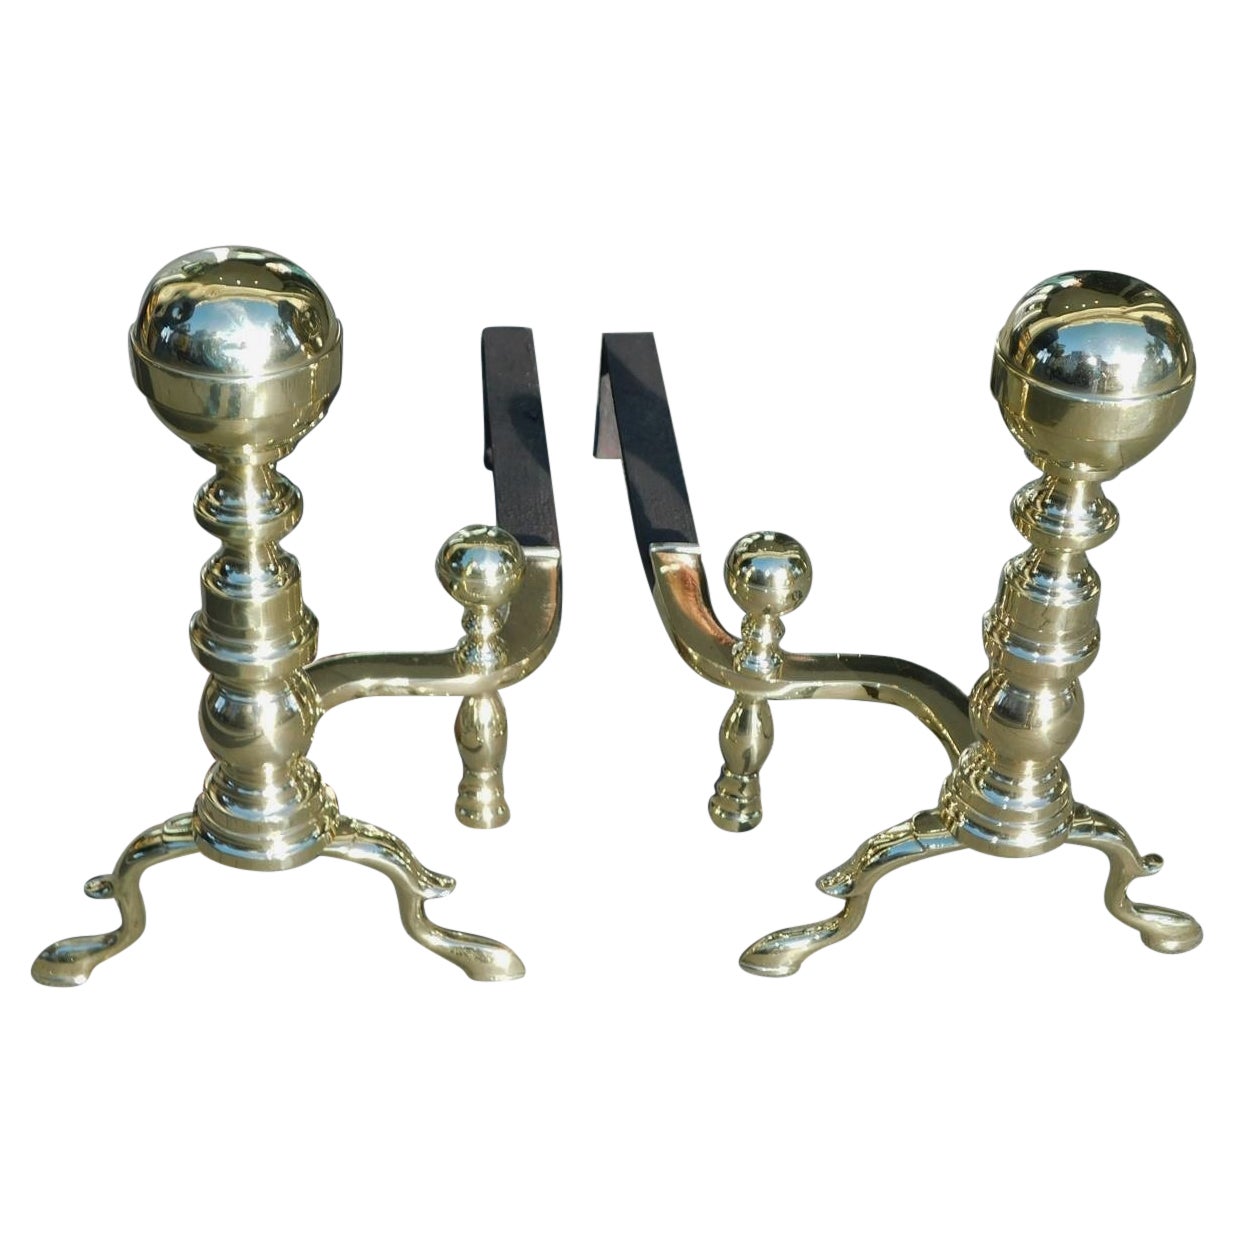 Pair of American Brass Ball Finial Andirons with Matching Log Stops, Circa 1800 For Sale